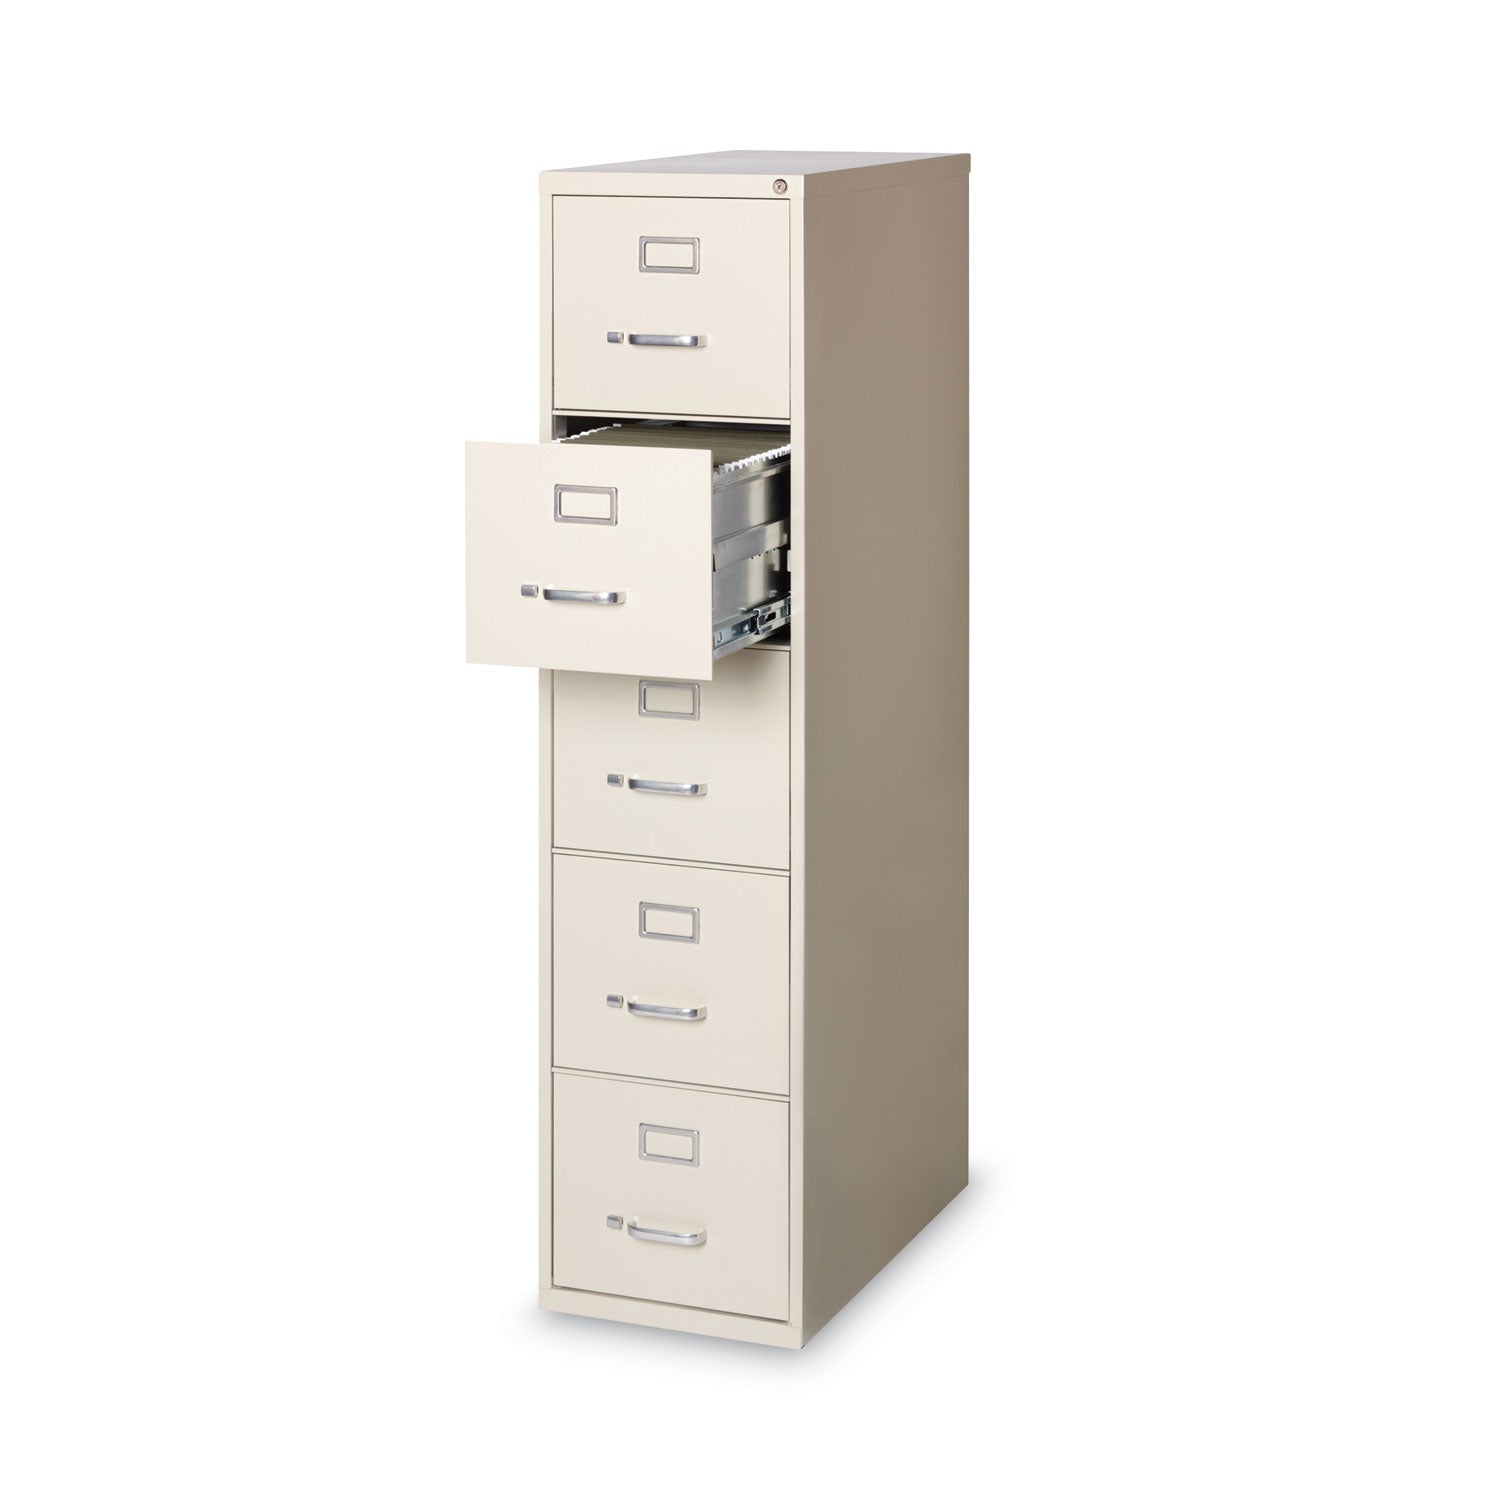 vertical-letter-file-cabinet-5-letter-size-file-drawers-putty-15-x-265-x-6137_hid17777 - 3